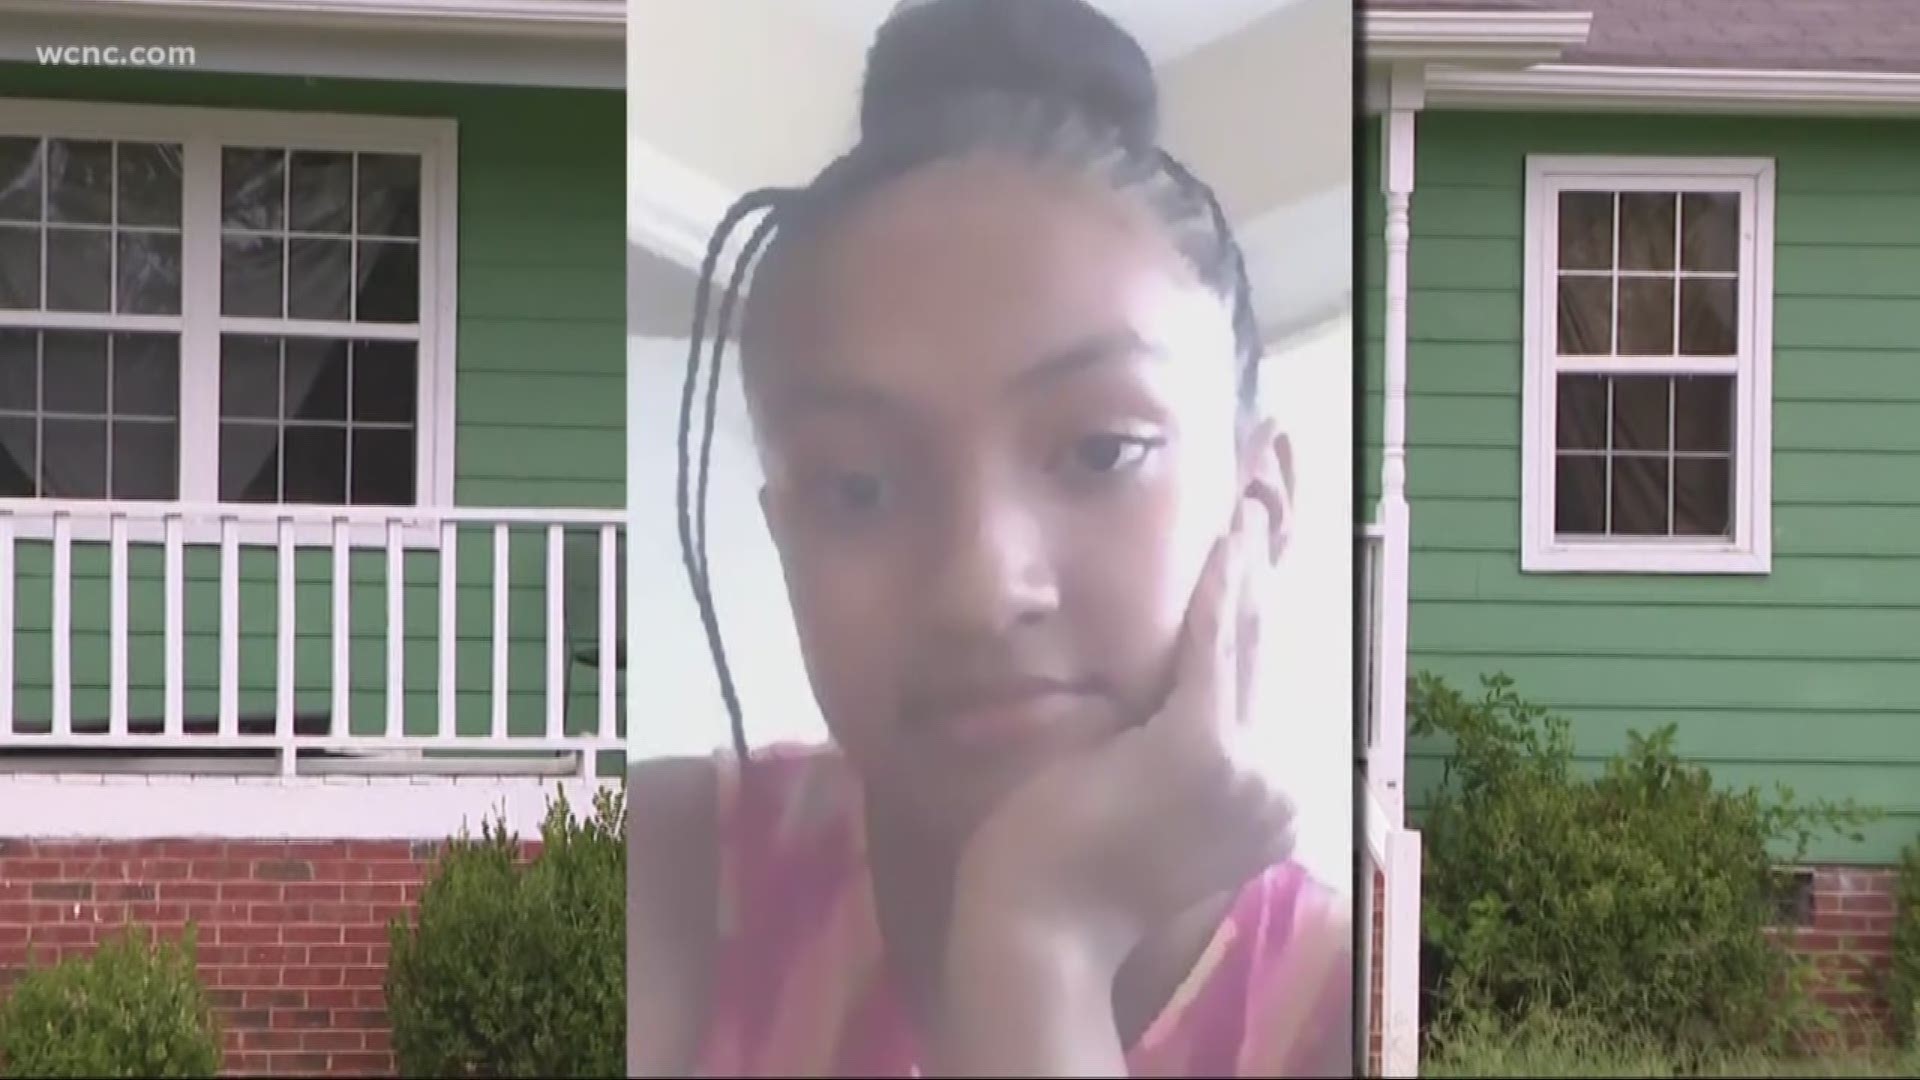 A Union County, NC father has been charged with killing his 15-year-old daughter during a weekend visit at his home, according to the Union County Sheriff's Office.